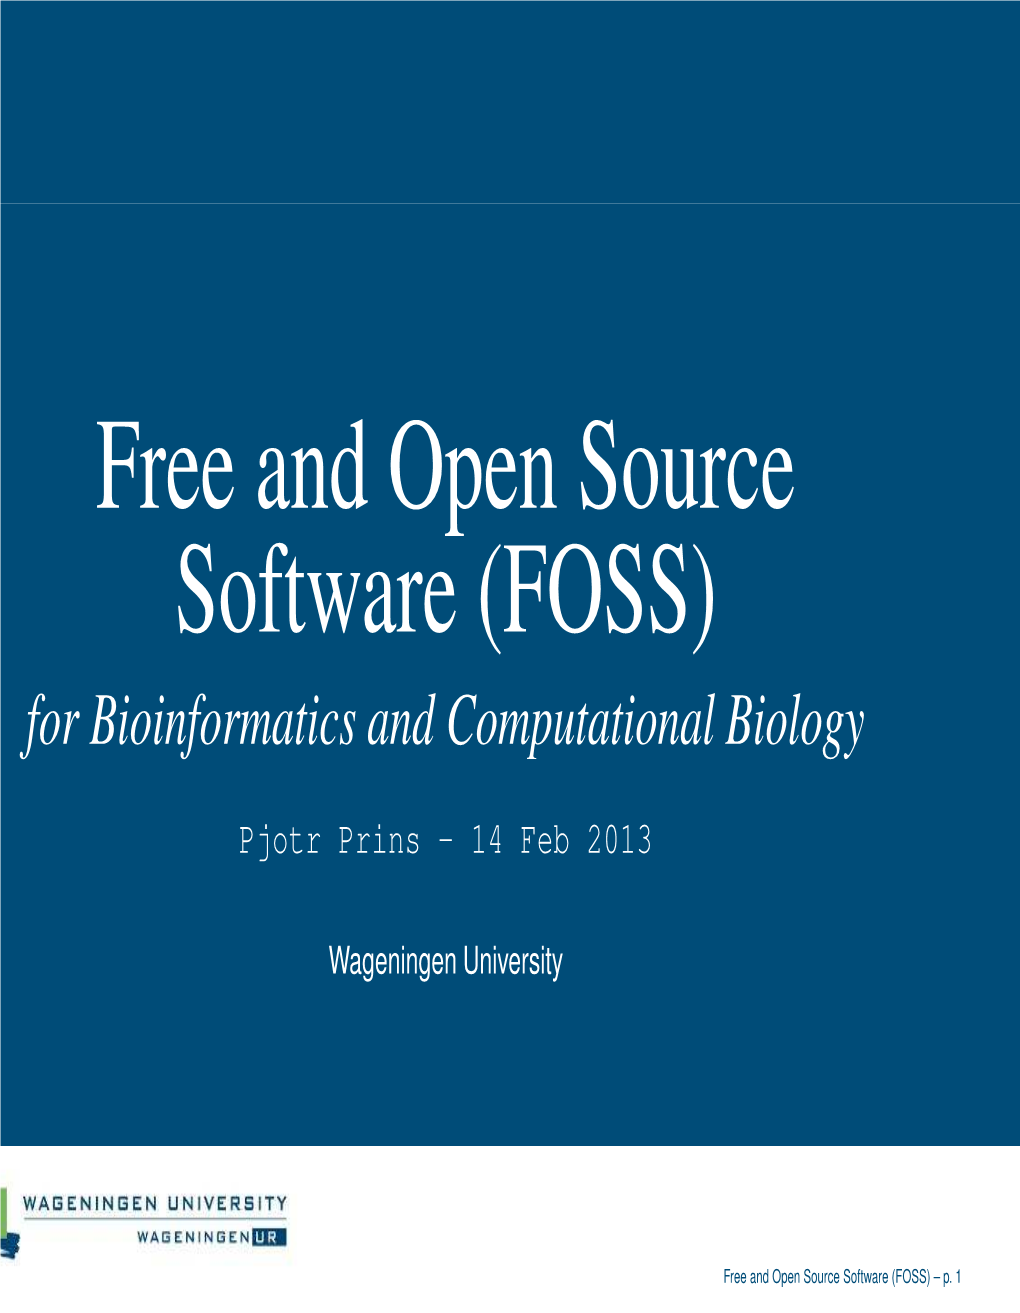 Free and Open Source Software (FOSS) for Bioinformatics and Computational Biology